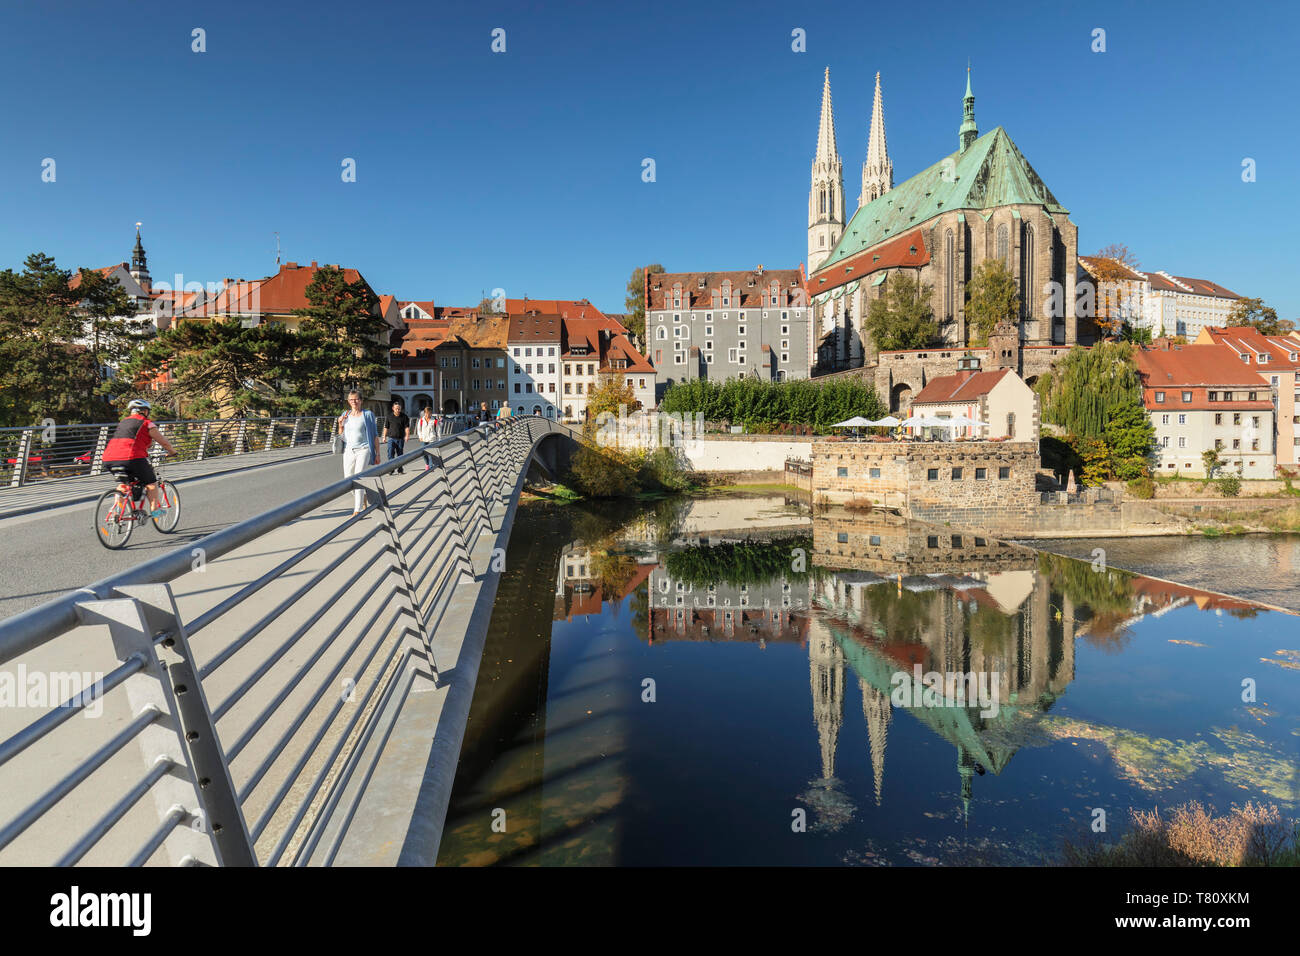 Bridge over Neisse River to the old town and St. Peter and Paul Church, Goerlitz, Saxony, Germany, Europe Stock Photo